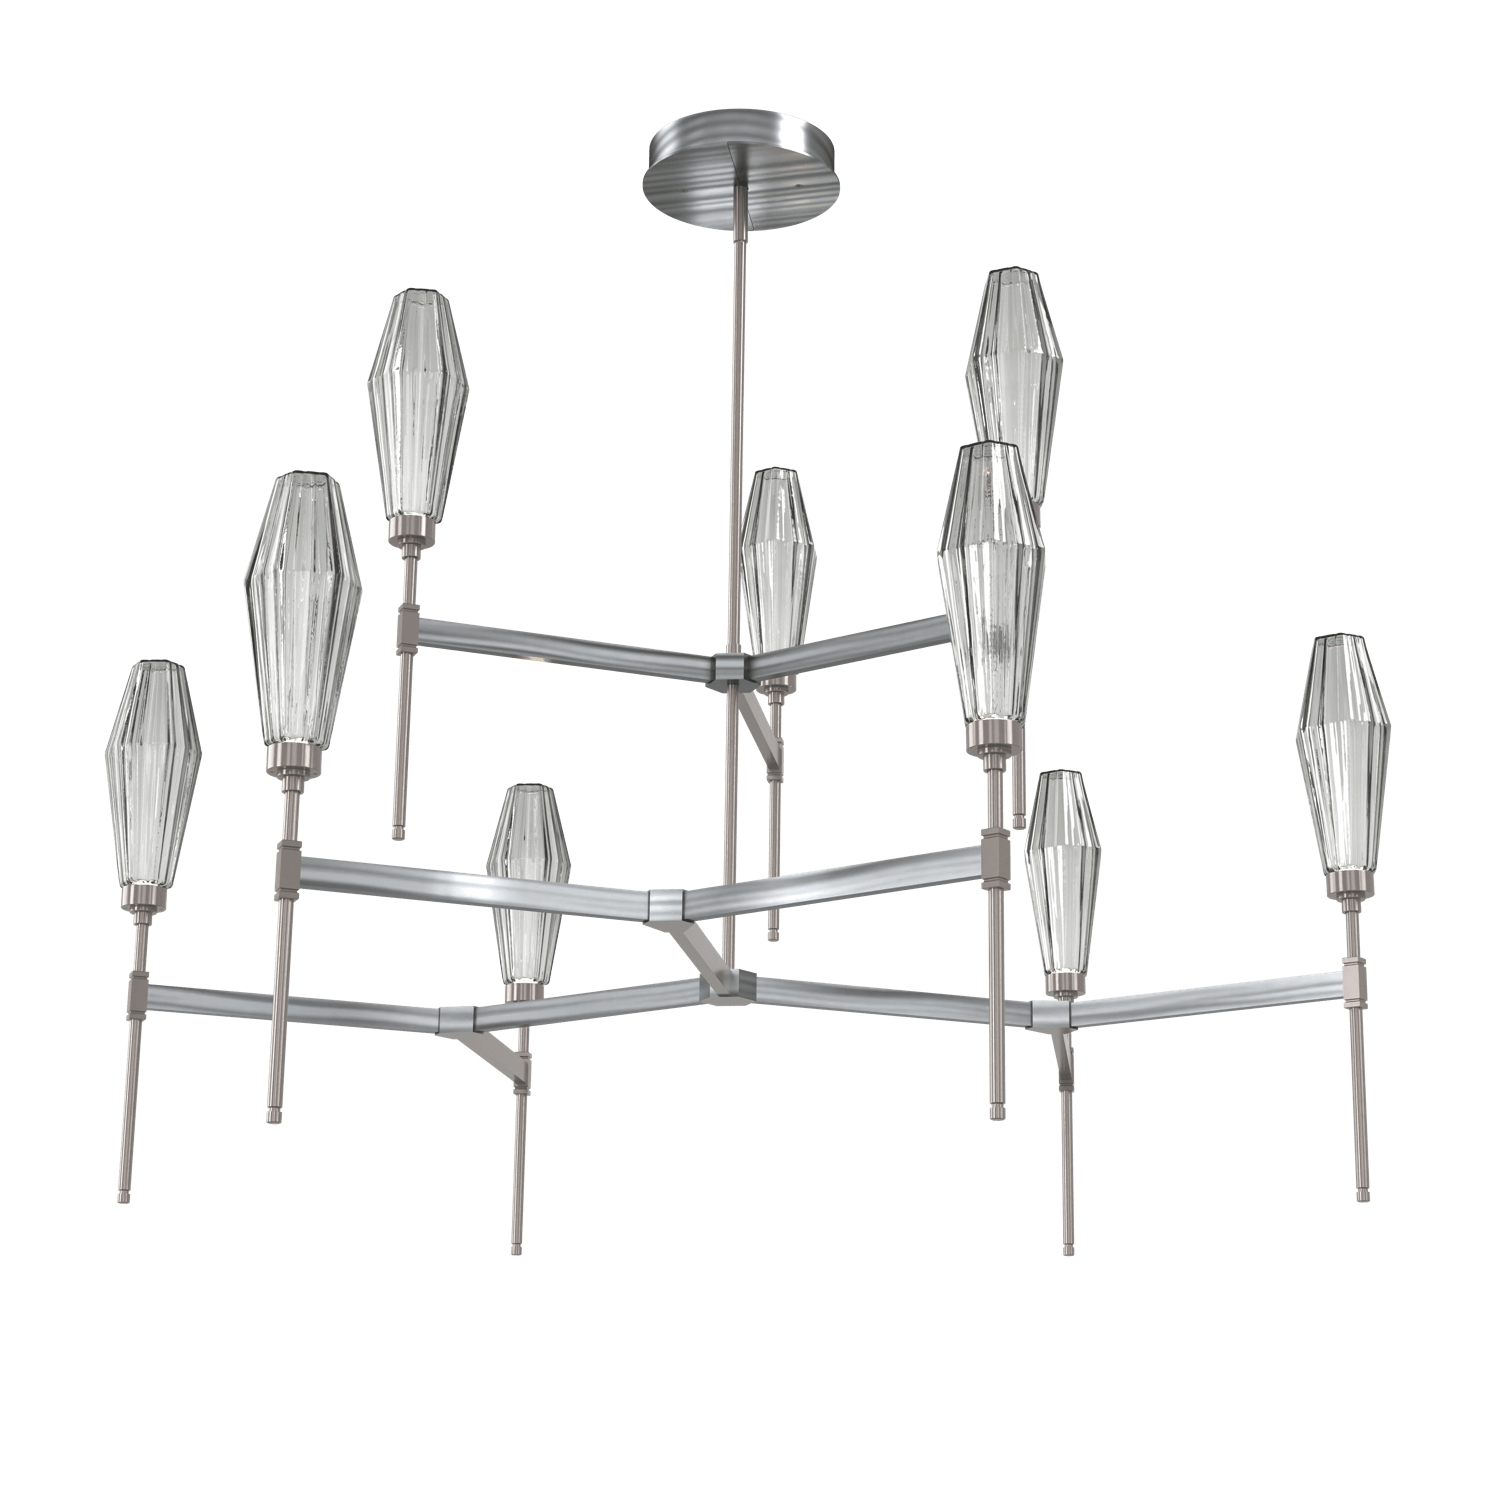 CHB0049-54-GM-RS-Hammerton-Studio-Aalto-54-inch-round-two-tier-belvedere-chandelier-with-gunmetal-finish-and-optic-ribbed-smoke-glass-shades-and-LED-lamping